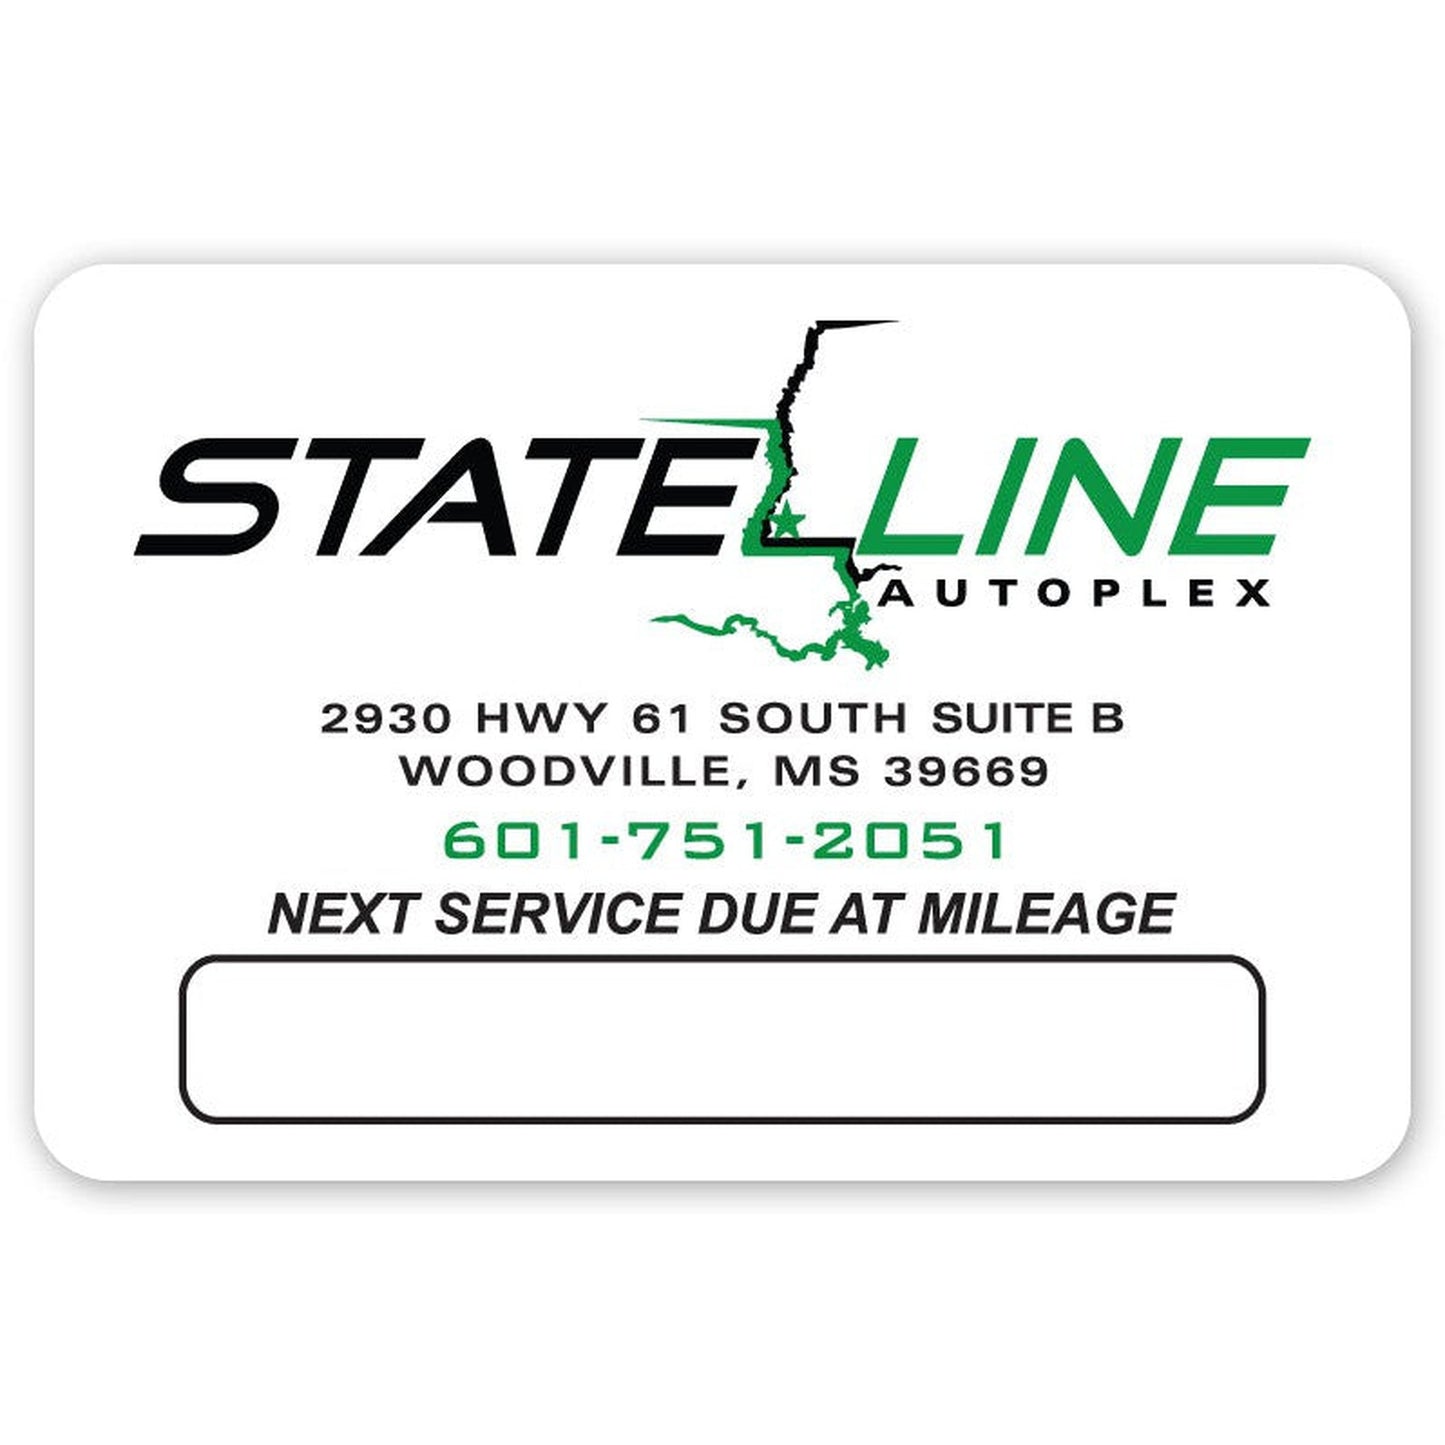 Custom Write-On Oil Change Stickers - Static Cling (Roll of 500)